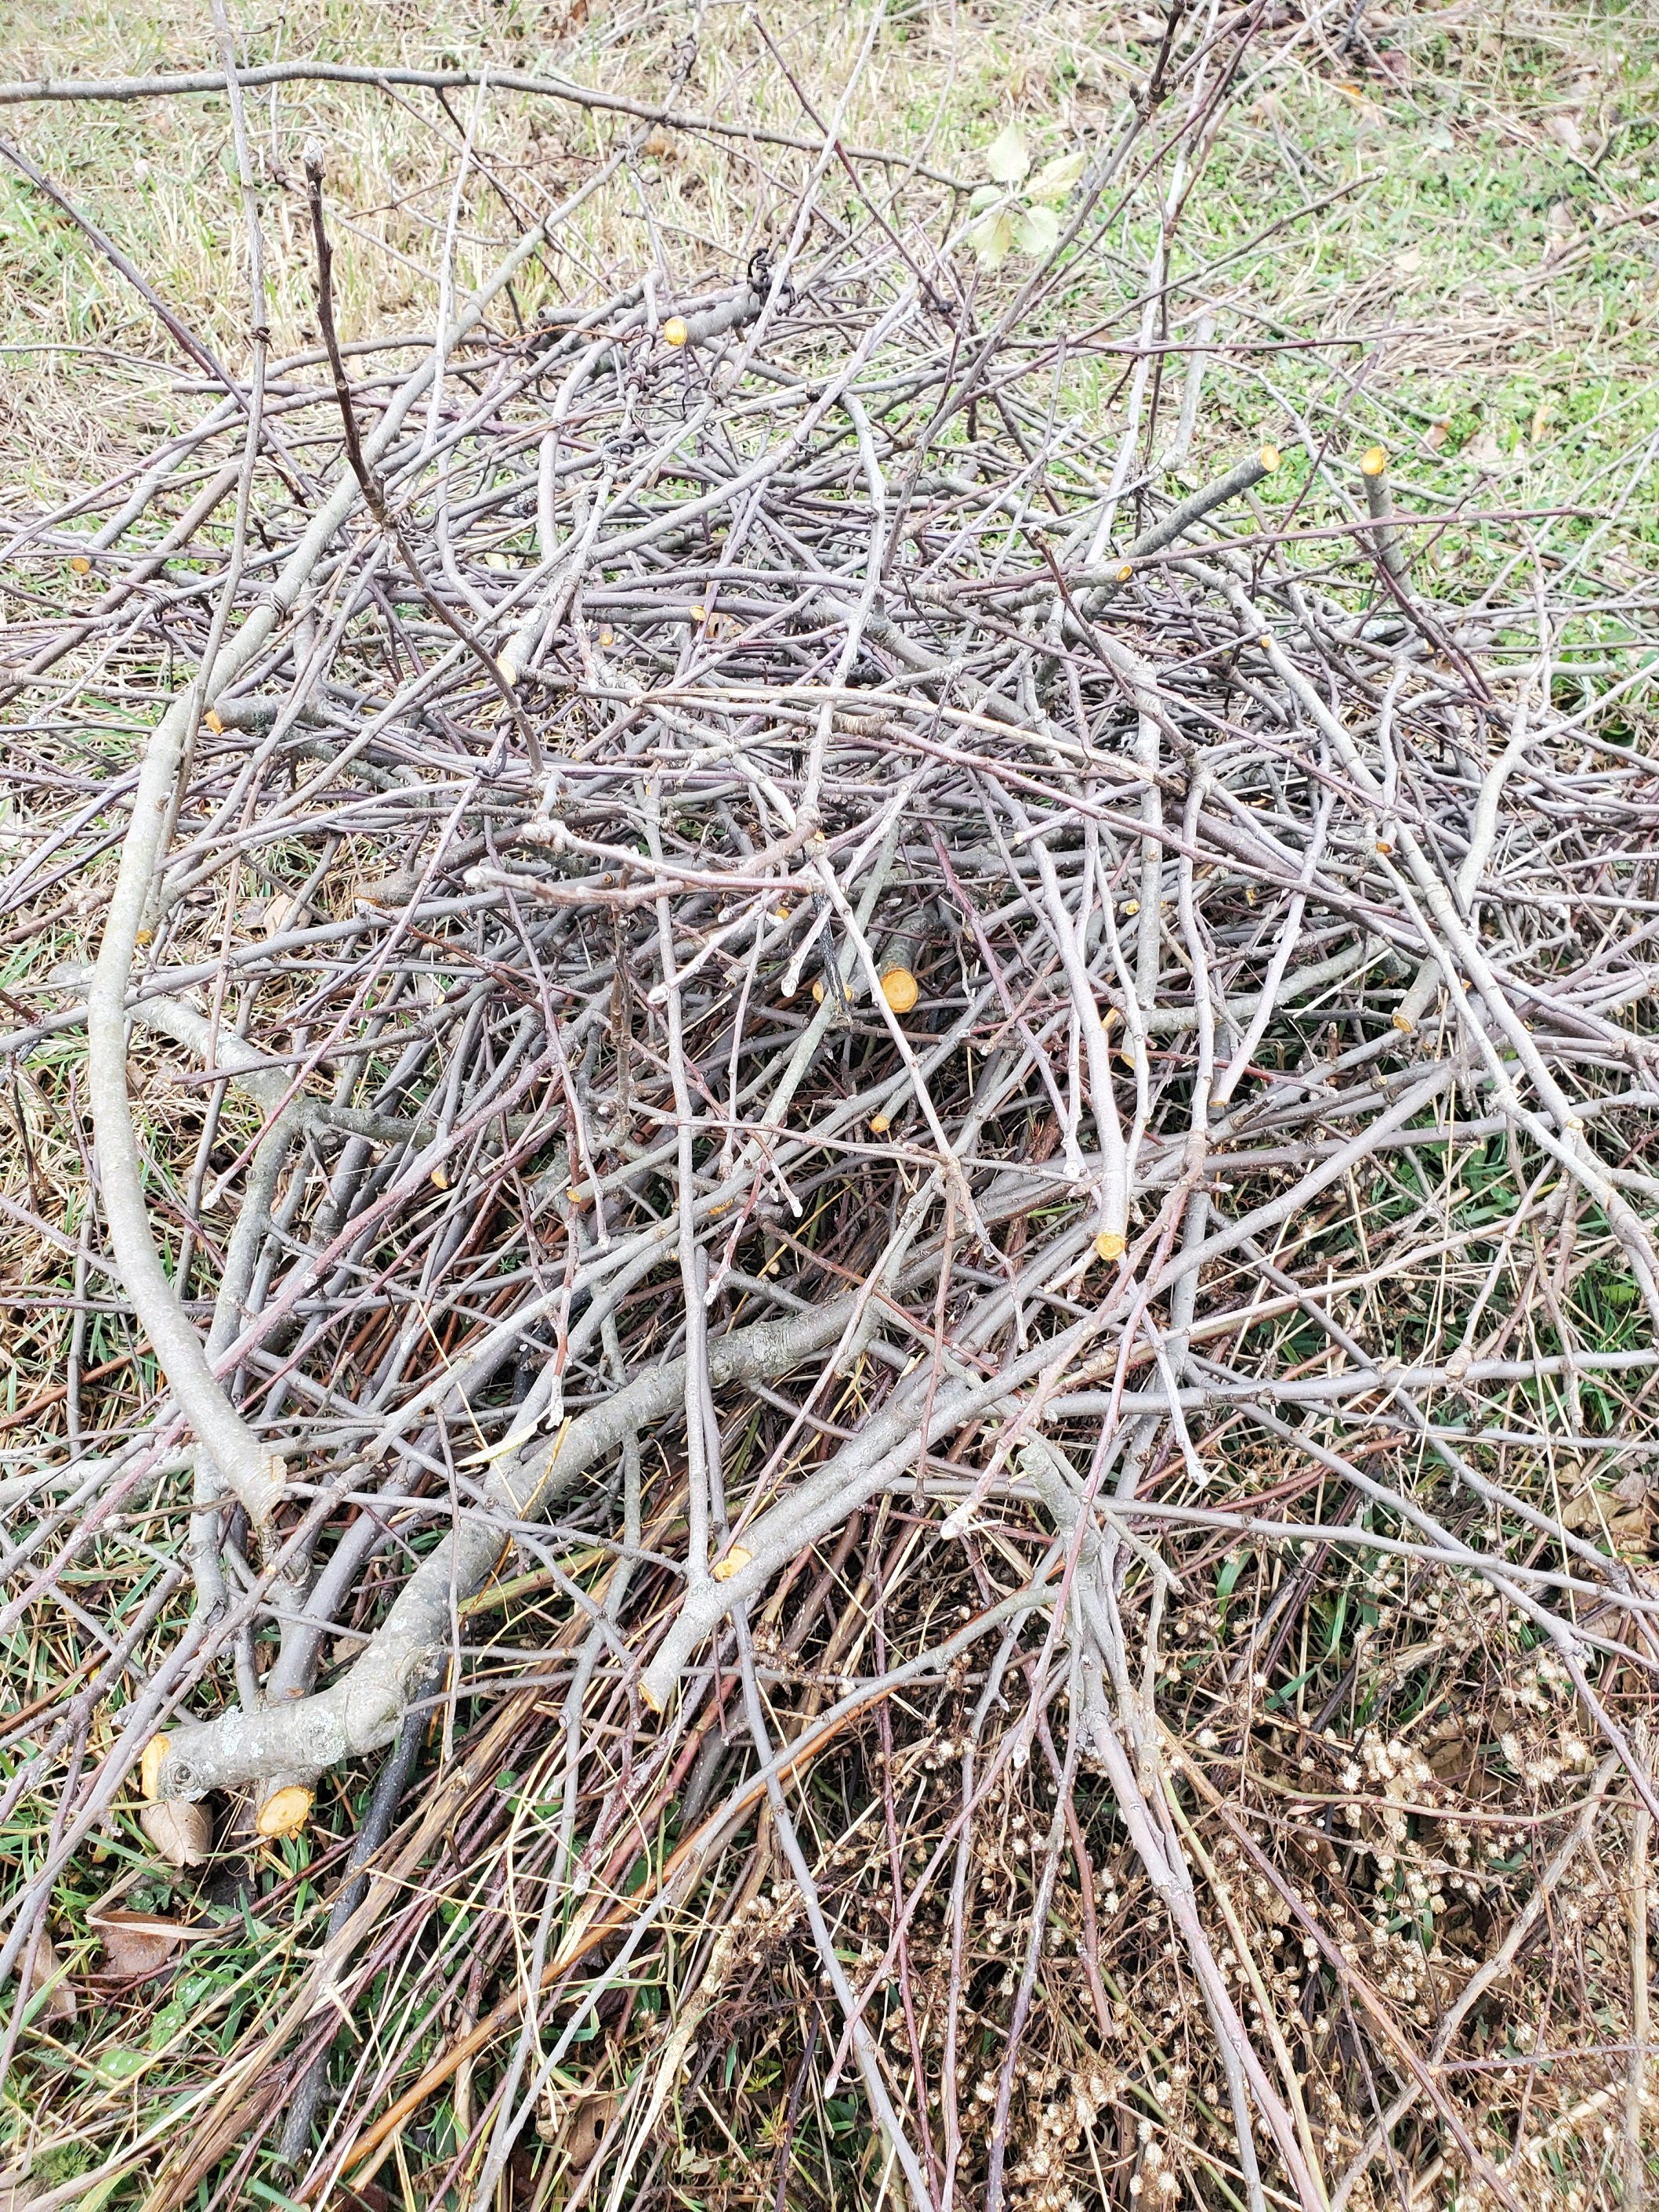 Isn't that just a pile of sticks?